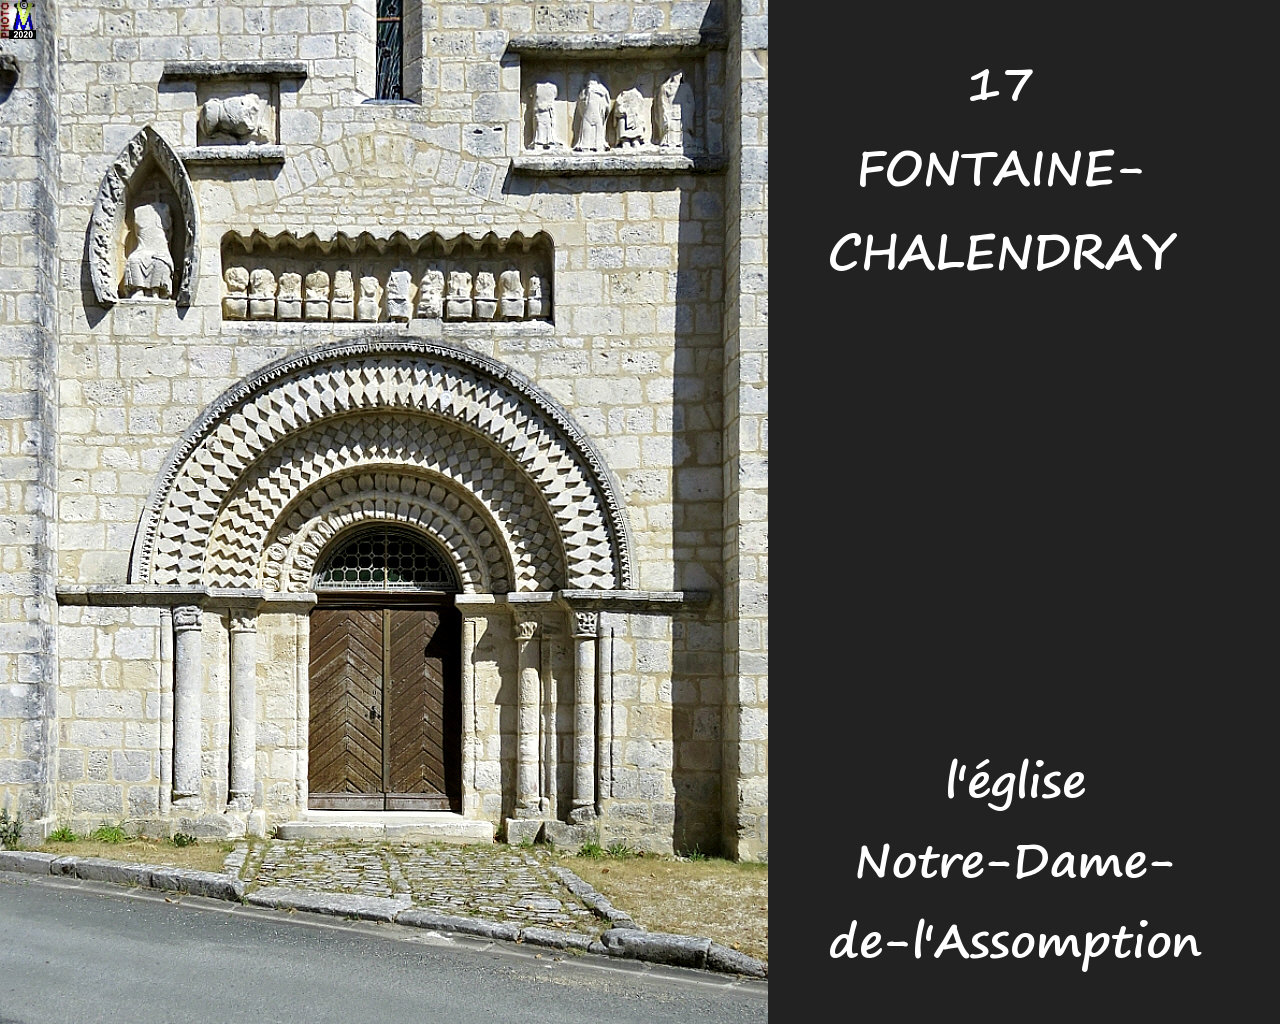 17FONTAINE-CHALENDRAY_eglise_1020.jpg